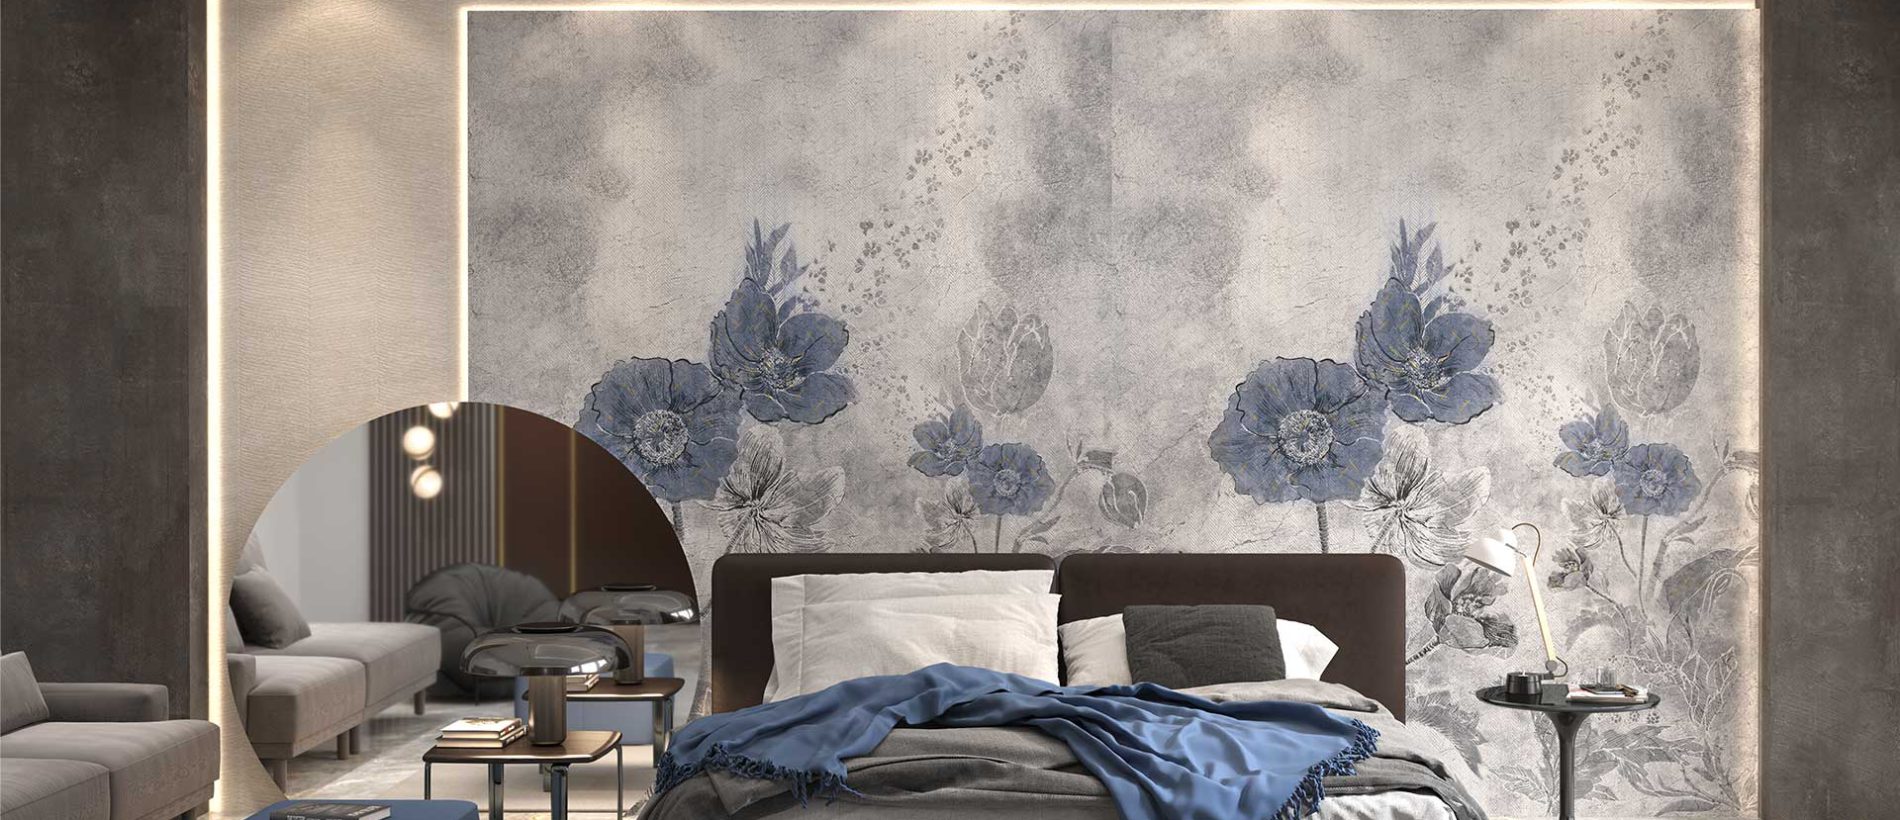 a bedroom used a porcelain slab for the wall that looks like a flower